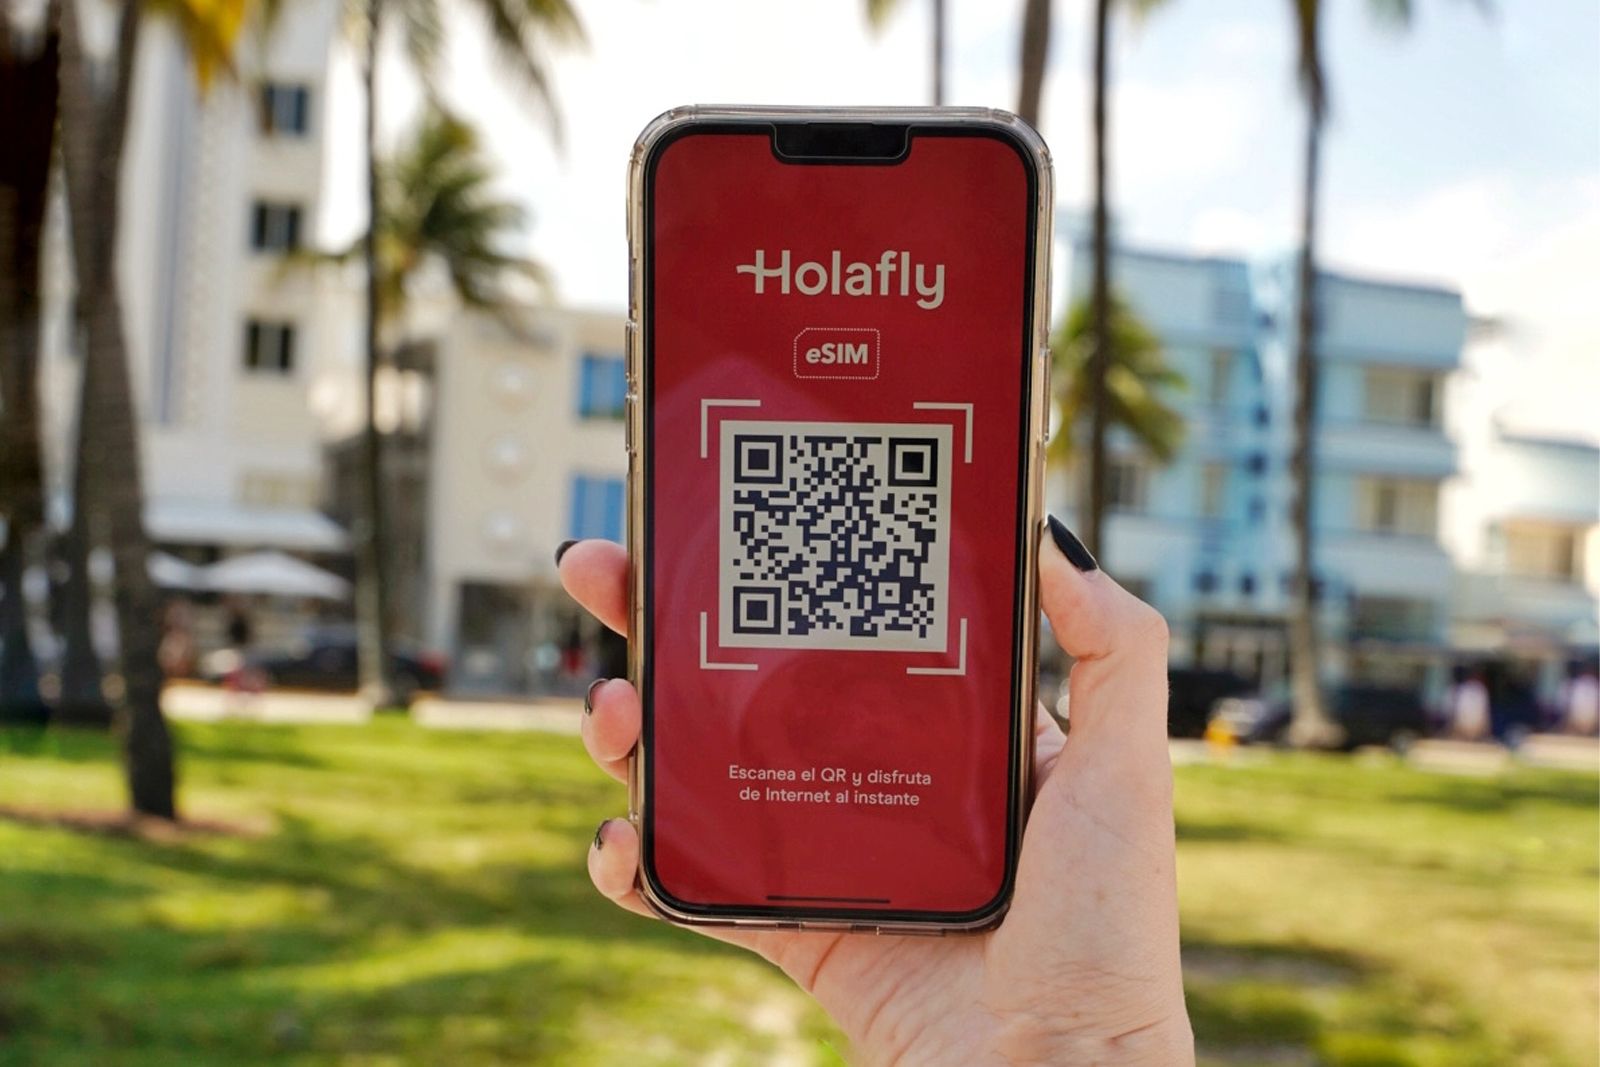 How to use an iPhone in the USA with an Holafly eSIM photo 2